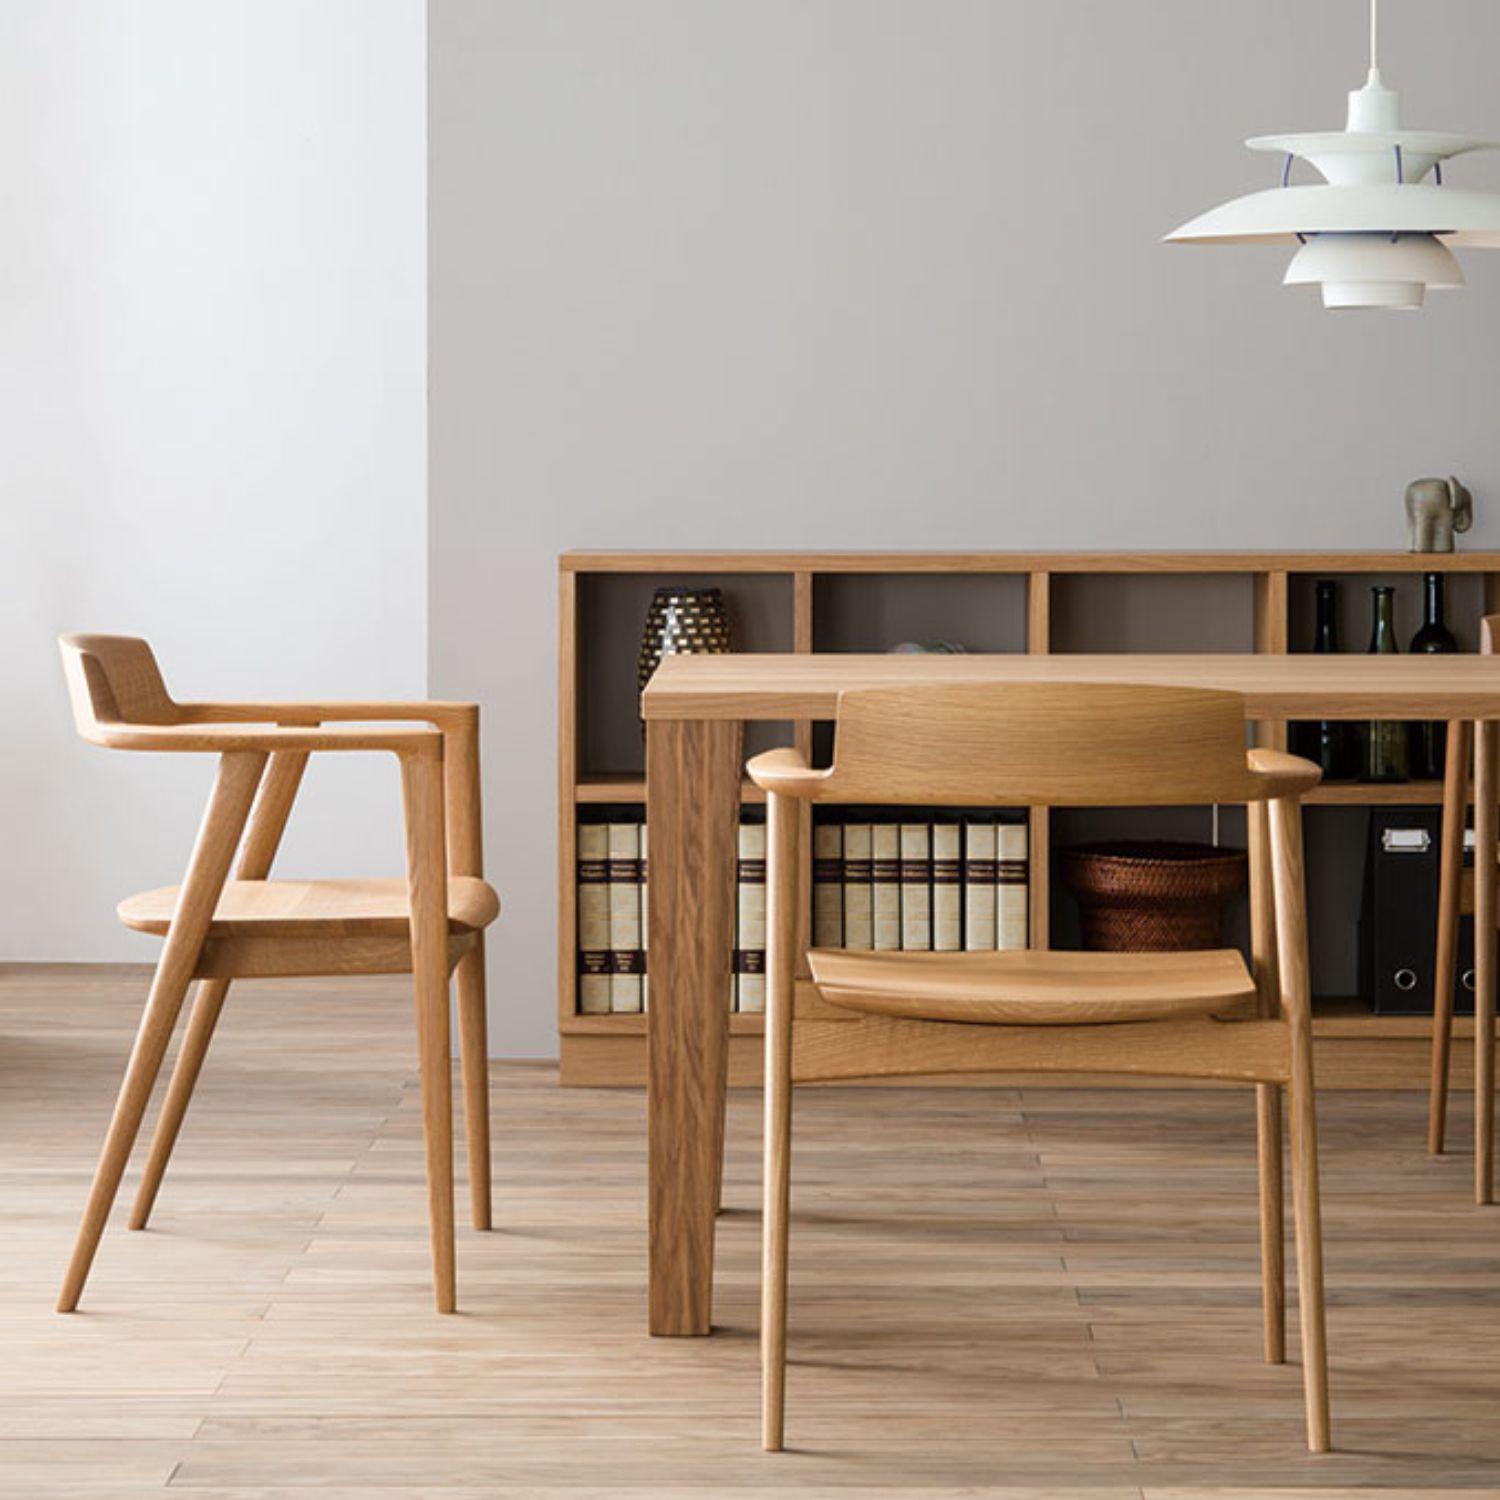 Motomi Kawakami 'Seoto KD221' dining armchair in oak for Hida.

For centuries, famed Hida artisans in Gifu prefecture have played a role in Japan's woodworking culture, crafting iconic bentwood furniture from sustainable local forests. Established